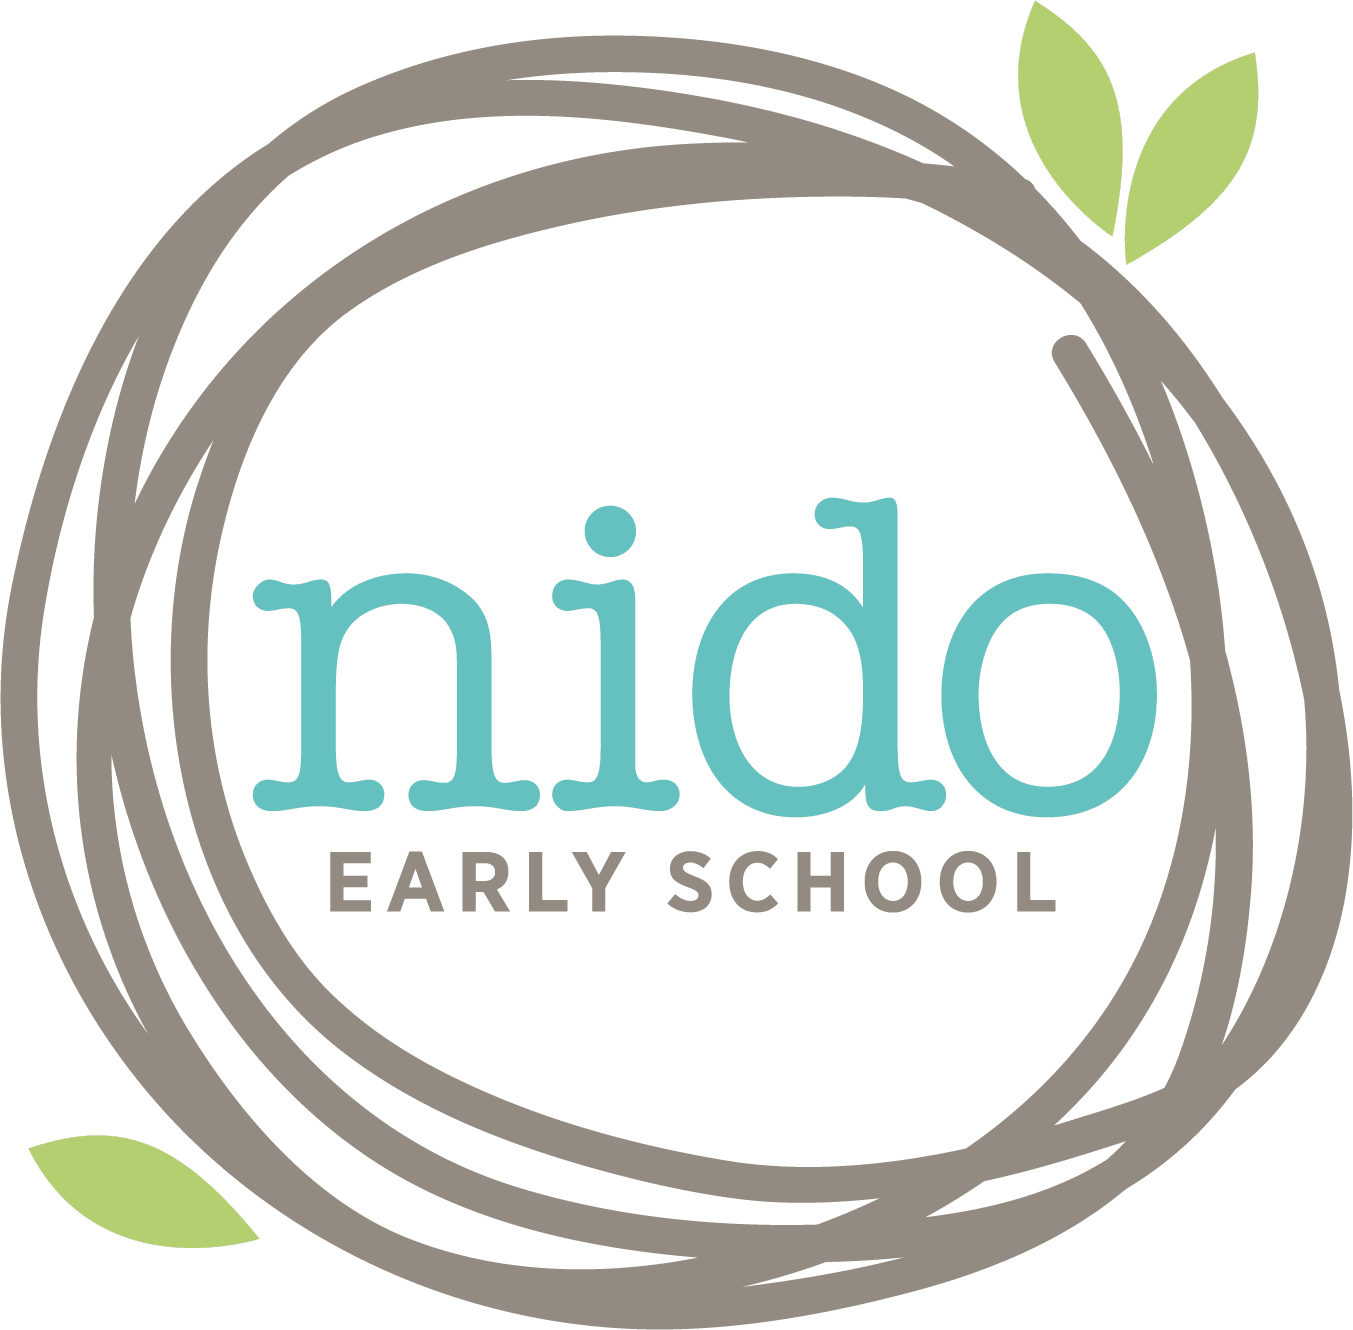 Logo for Nido Early School, featuring the word "NIDO" in stylish font with a horizontal line, and a green leaf symbol. "EARLY SCHOOL" text below. Black background emphasizes the visual appeal. SCS Group values their commitment to a nurturing learning environment.